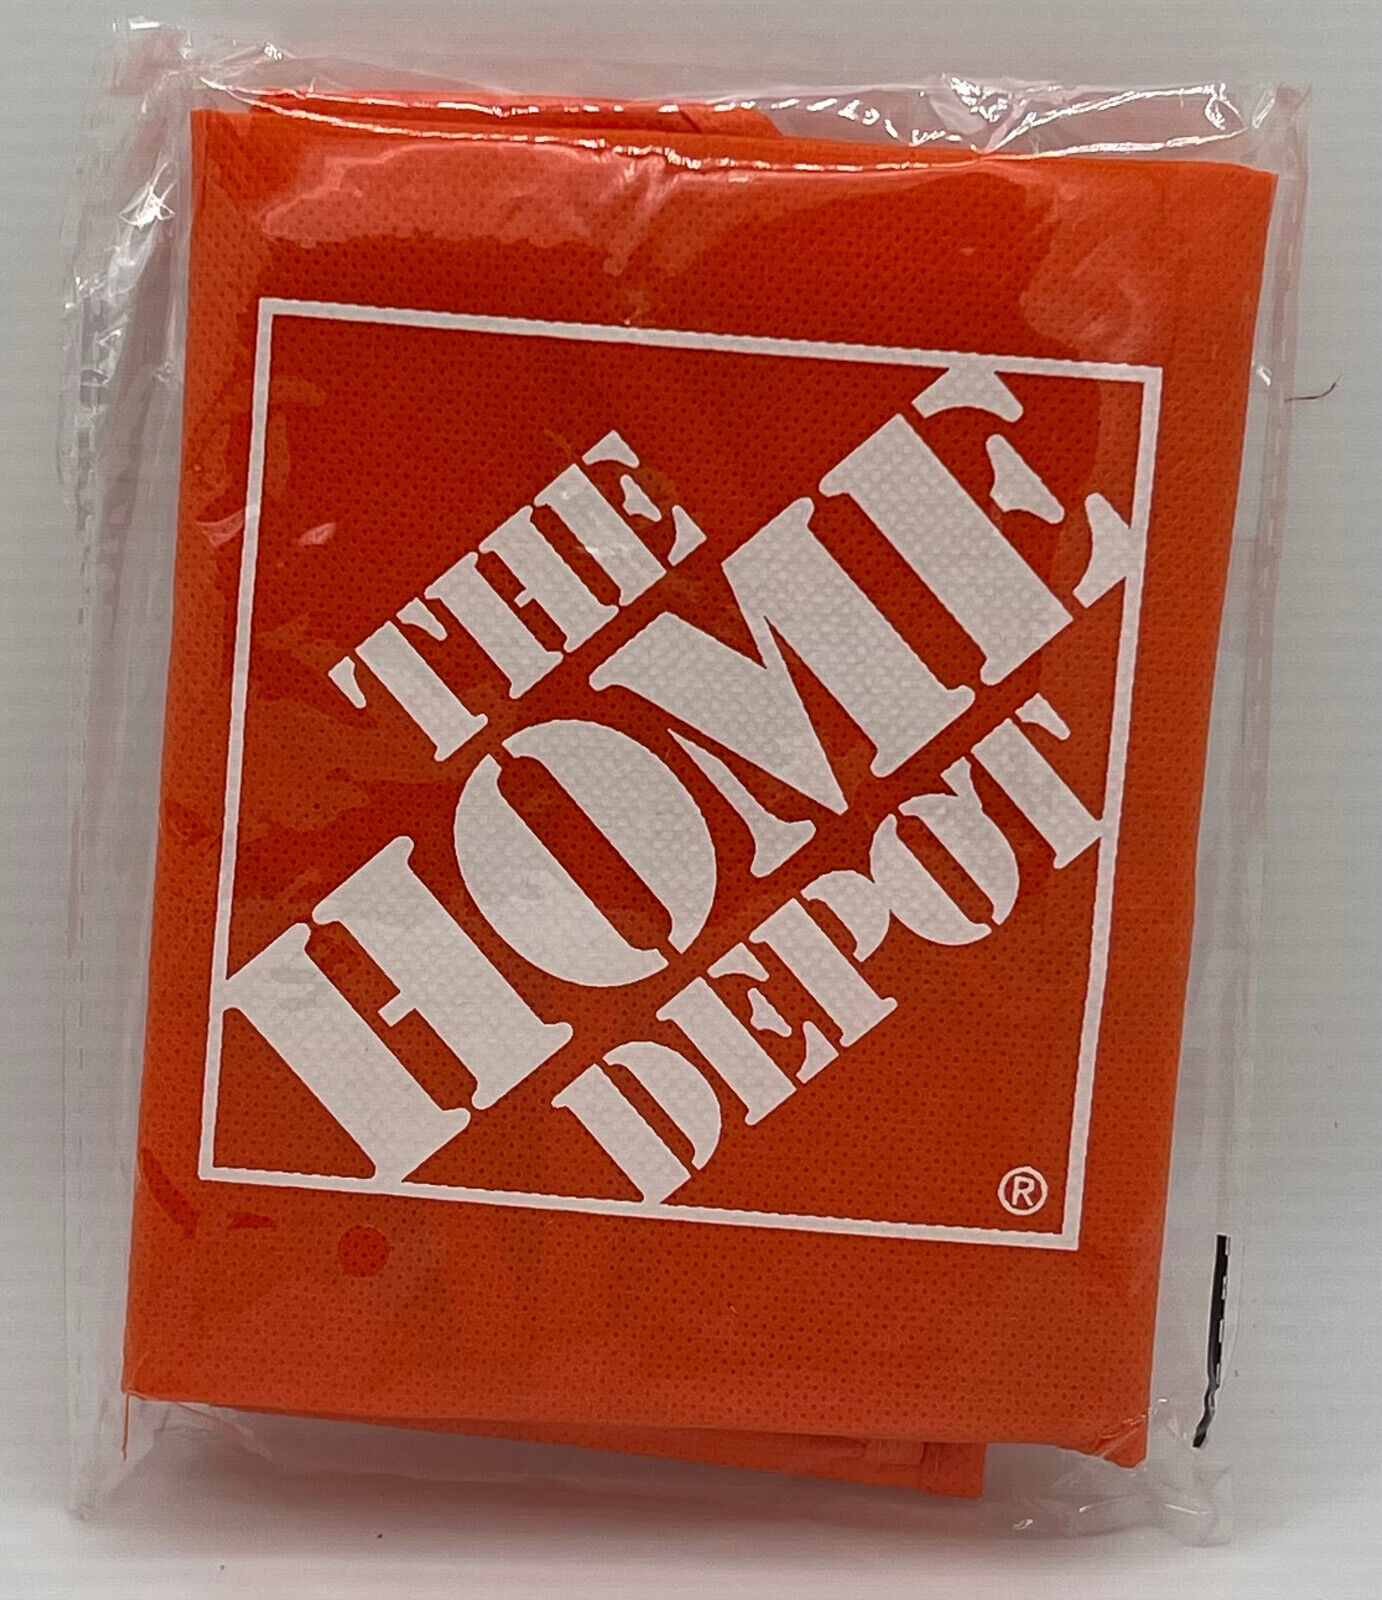 Home Depot Kids Workshop Apron-Build, Learn, Create, New in packaging